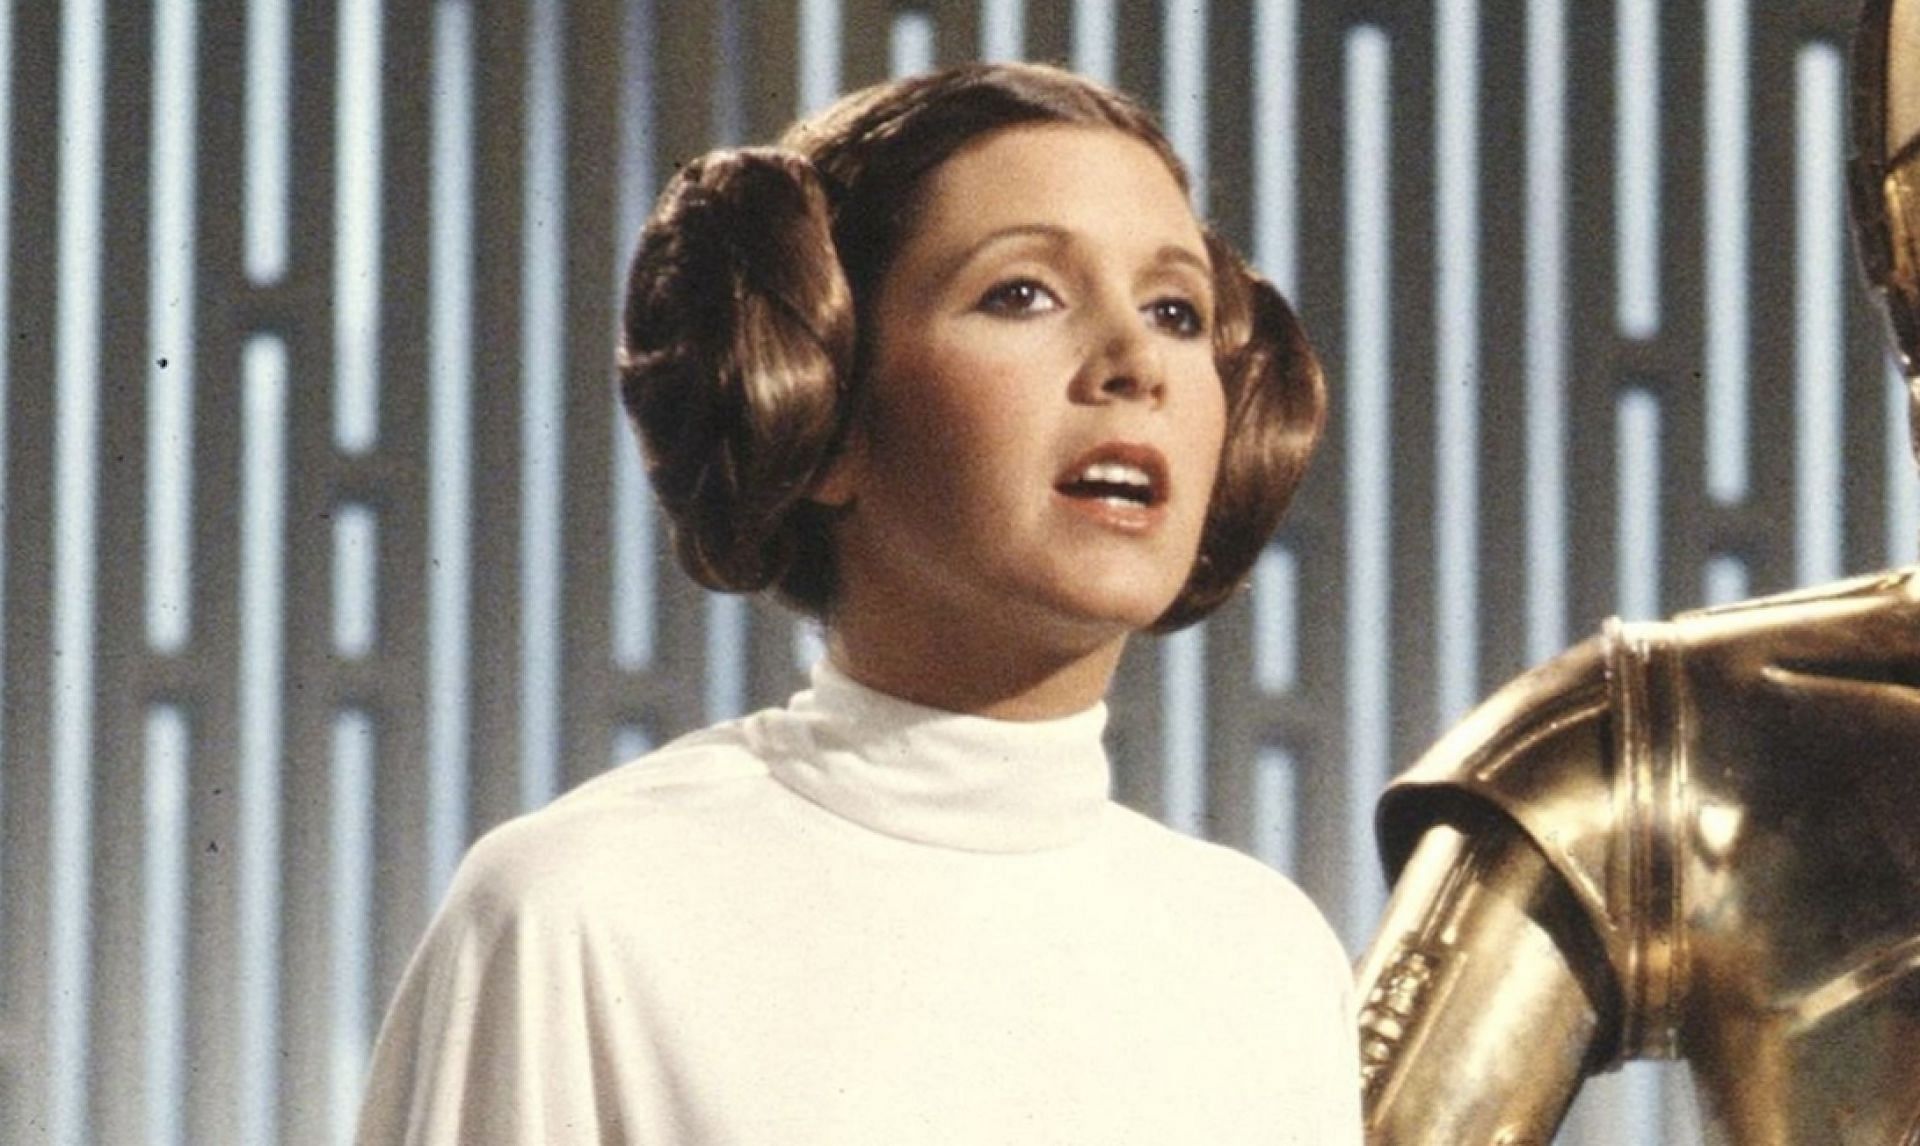 She embodied the Rebel Alliance's unwavering belief in a better future in Star Wars, inspiring hope and perseverance in all who fought alongside her (Image via Lucasfilm)